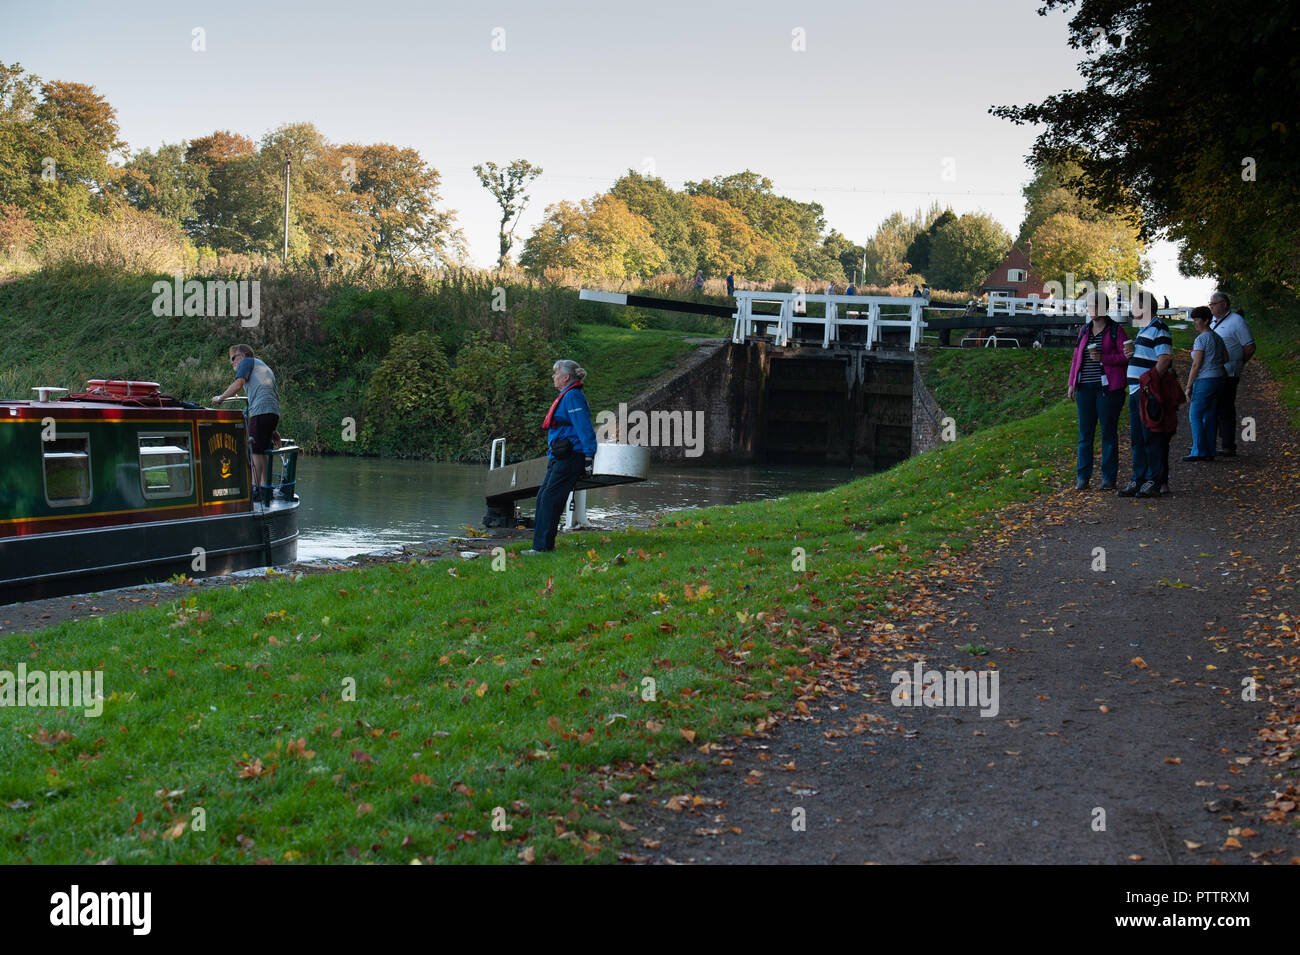 'Gonggozlers' watching Volunteer Lock Keepers helping a narrowboat through the Caen Hill Flight on the Kennet and Avon Canal, Devizes, Wiltshire, UK. Stock Photo